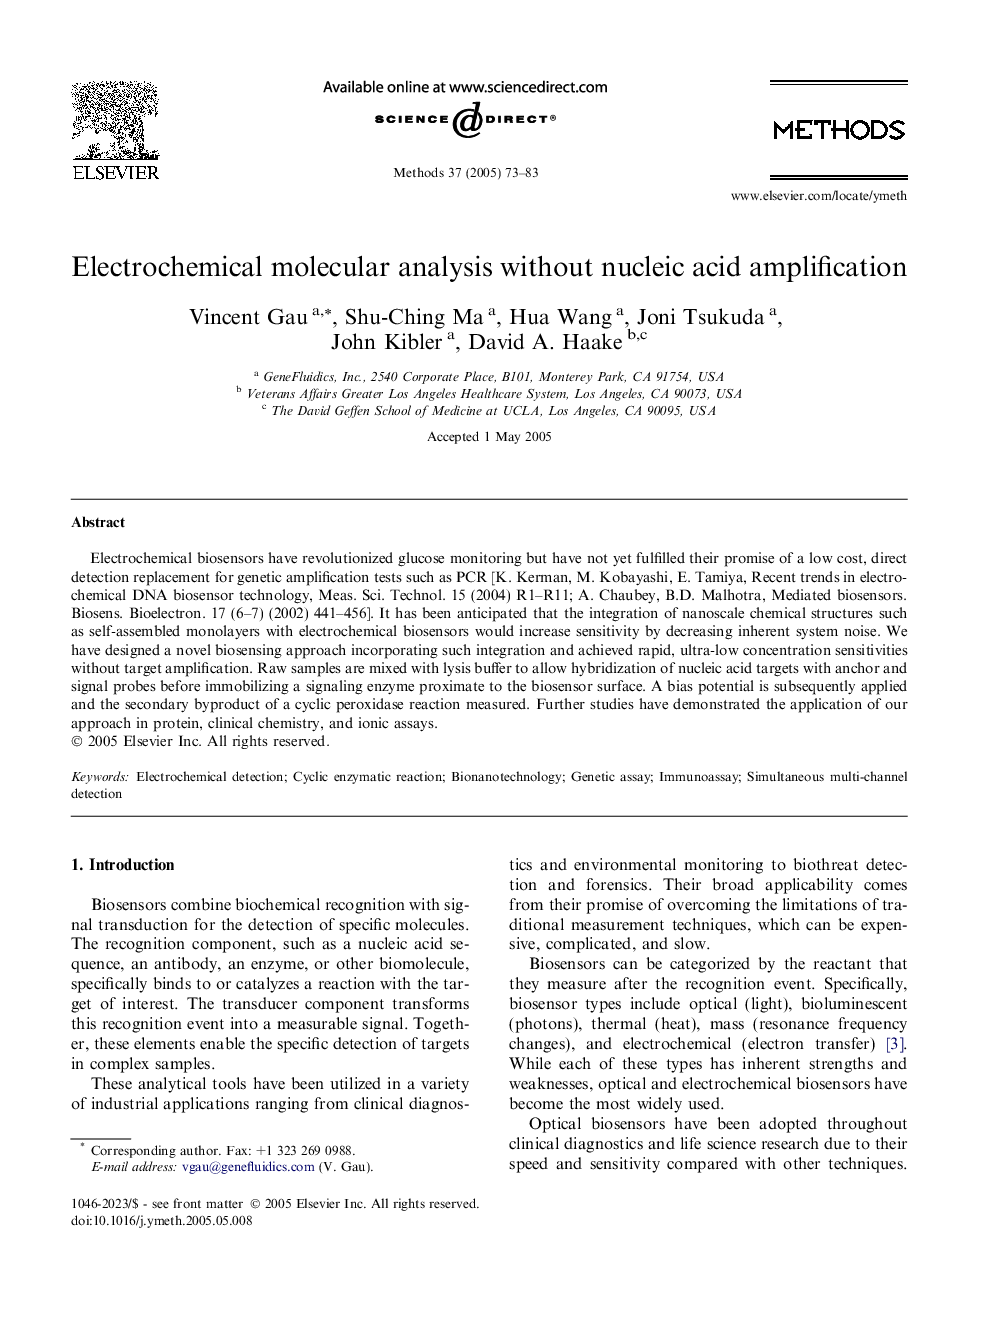 Electrochemical molecular analysis without nucleic acid amplification